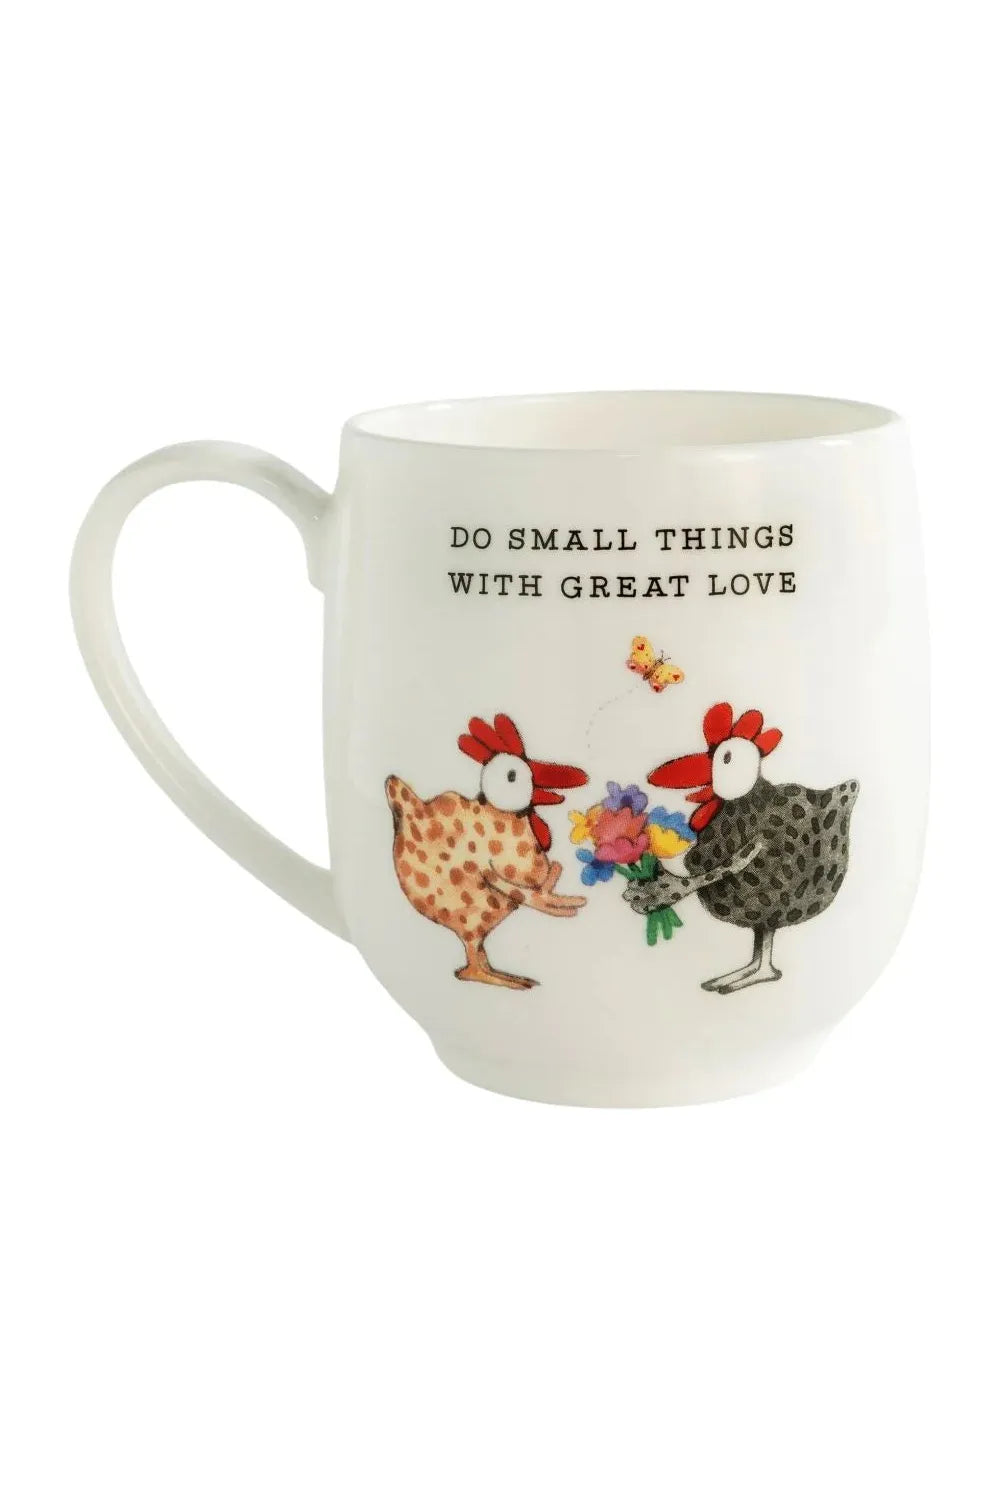 Twigseeds Mug - Do Small Things with Great Love